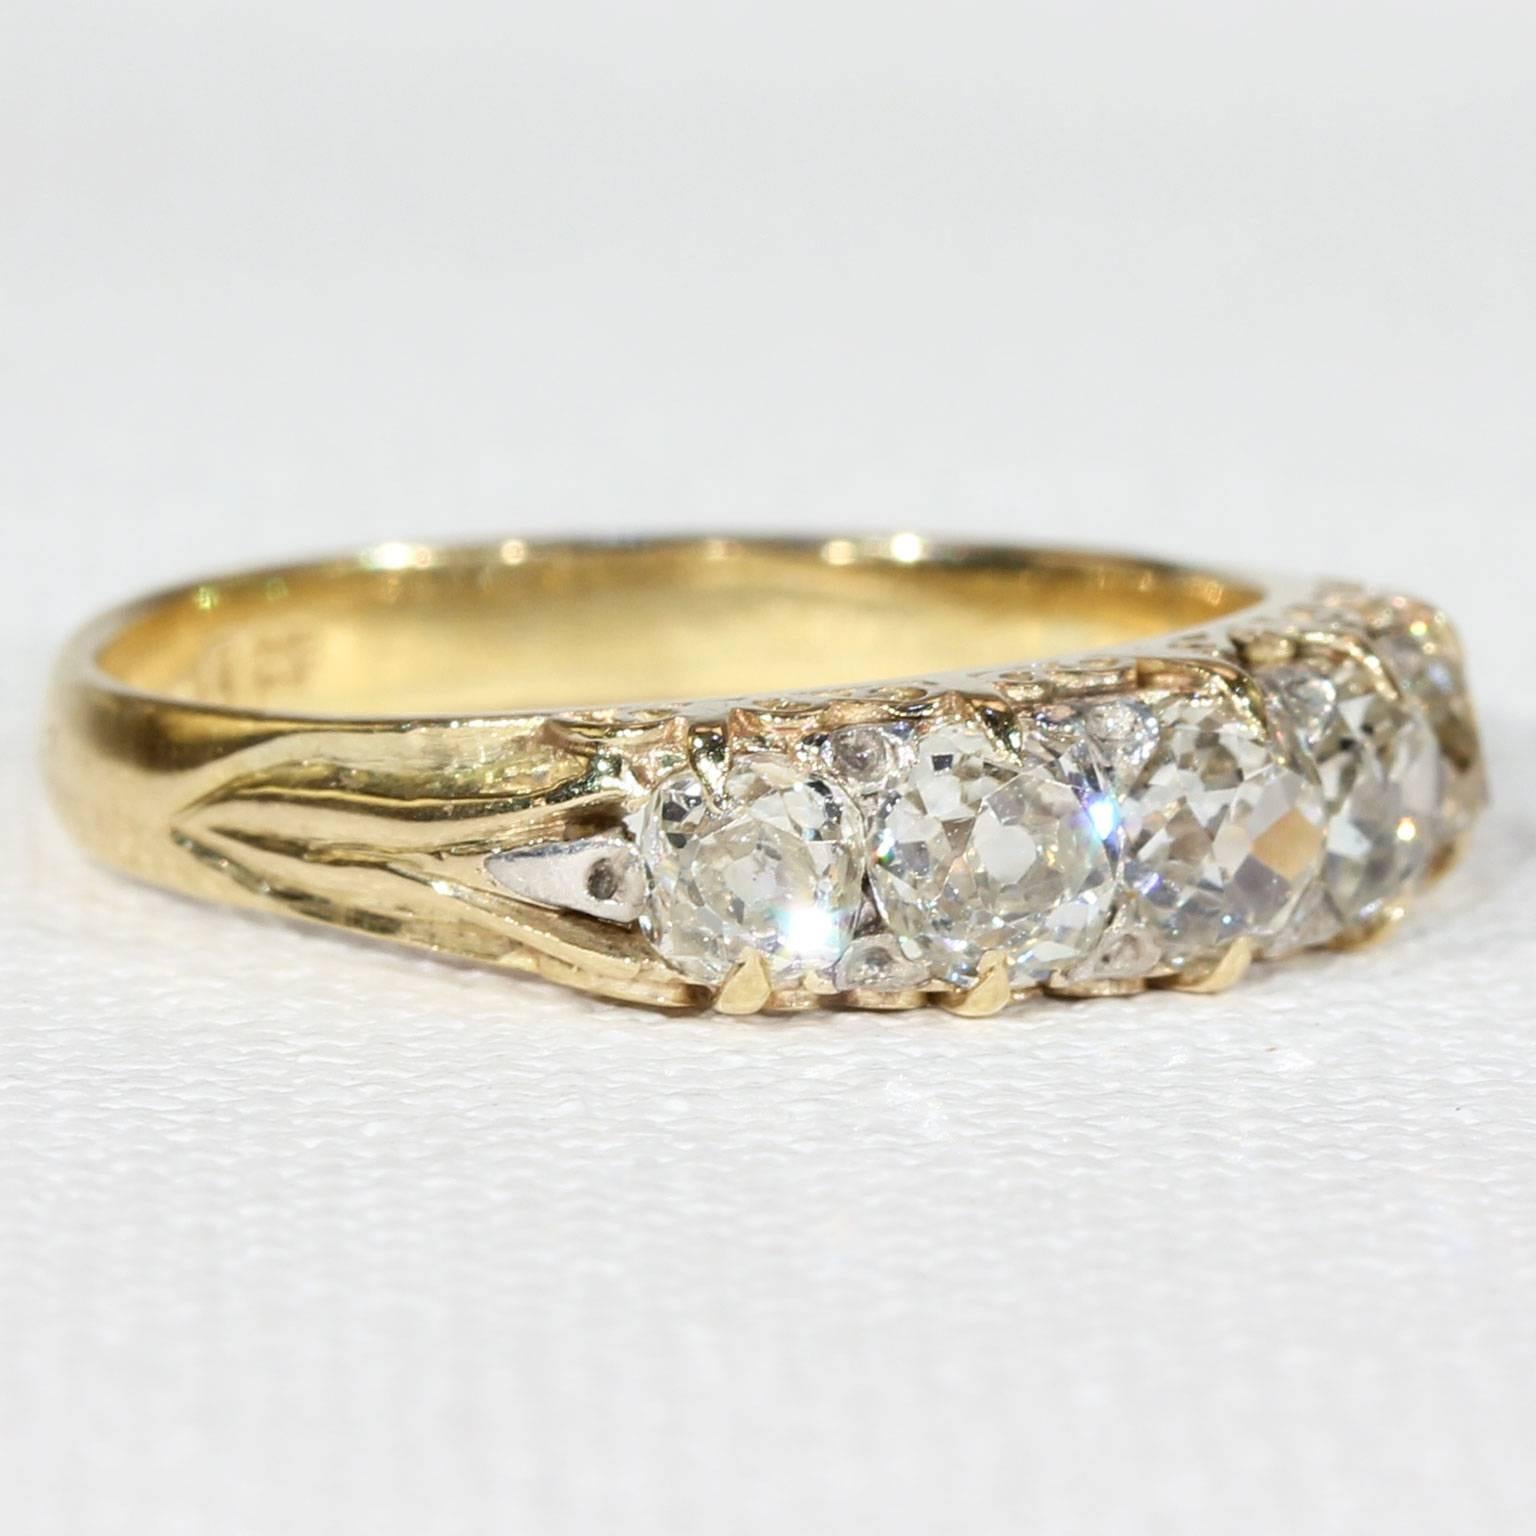 This antique Victorian diamond and gold ring was handcrafted in England around 1890. This glimmering English ring features five Old European cut diamonds, totaling approximately 1.2 carats. These round precious stones are lined in a row, and set in